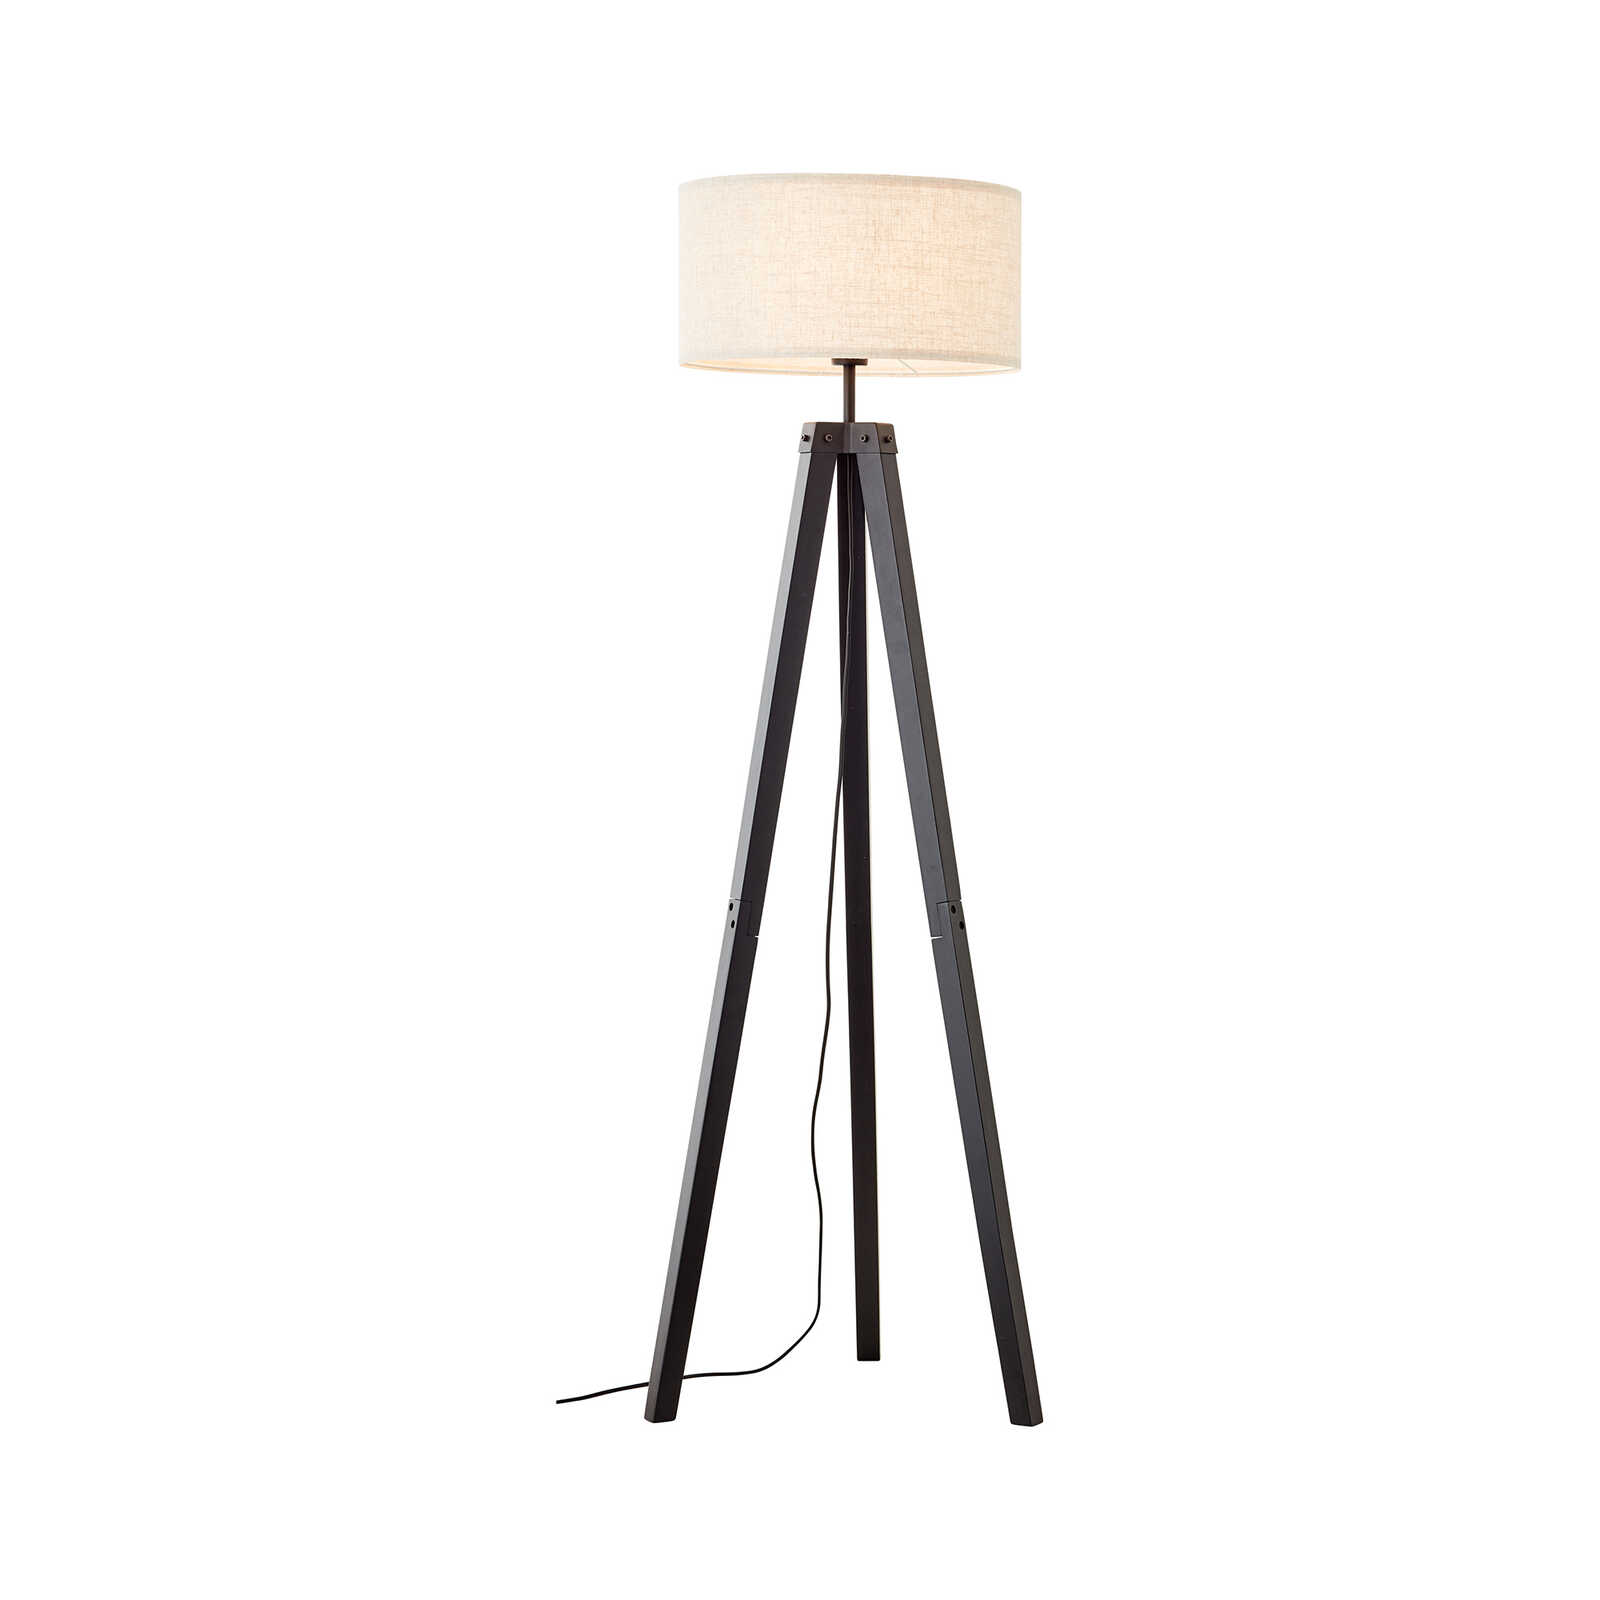 Floor lamp made of textile - Jack - Brown
